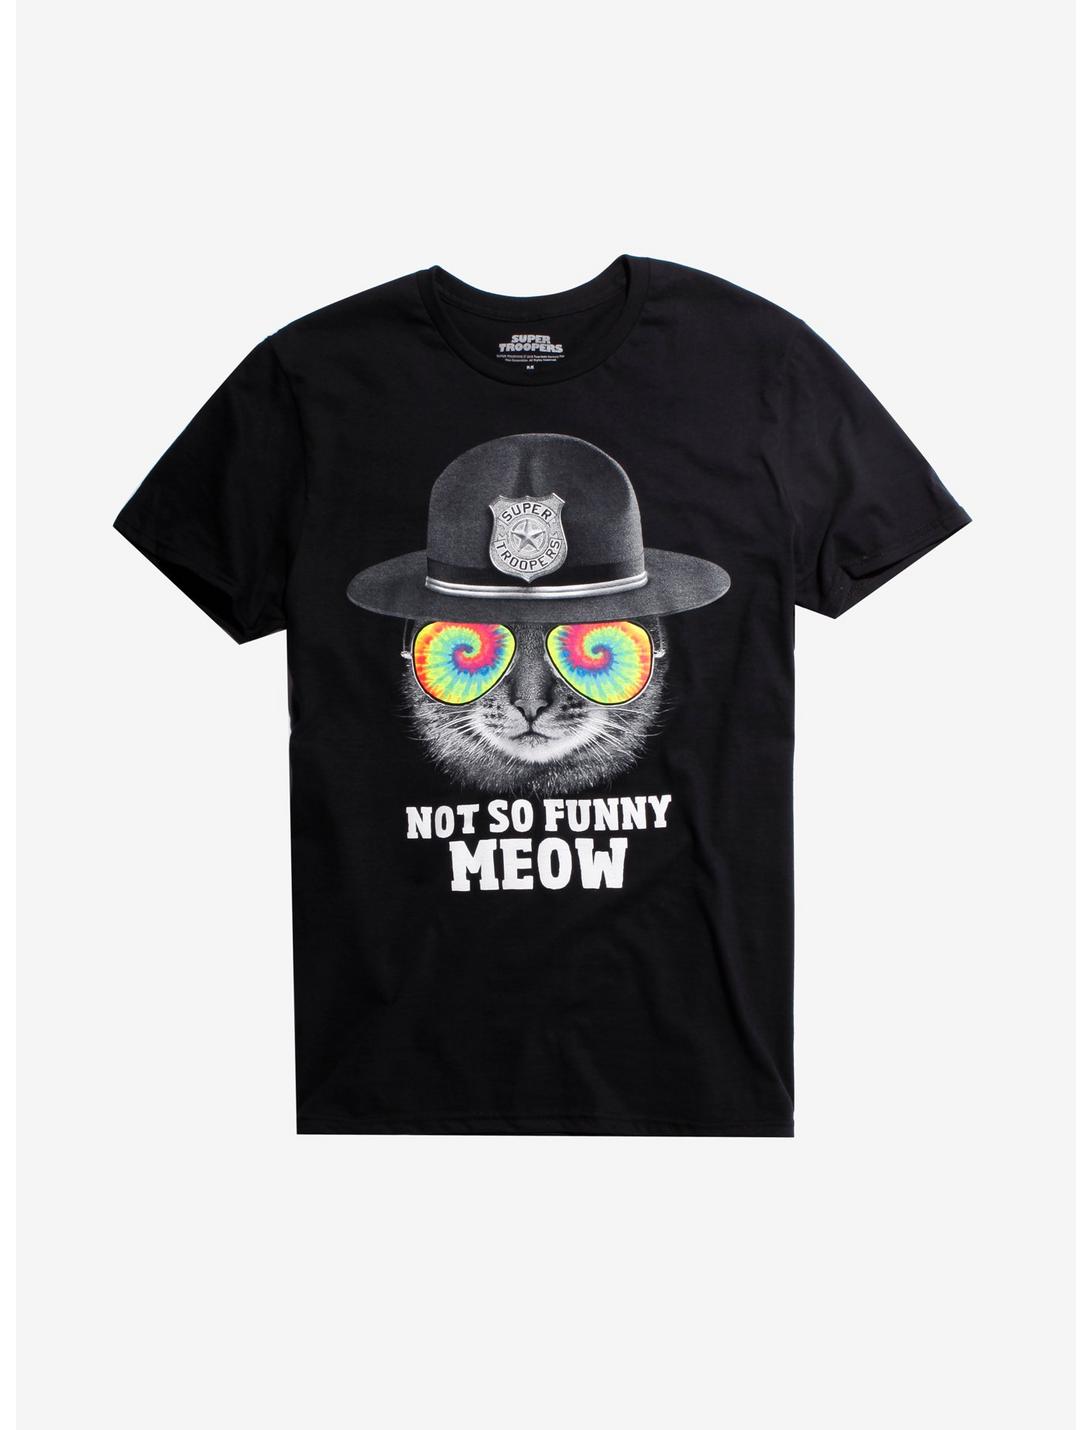 Super Troopers Not So Funny Meow T-Shirt, BLACK, hi-res